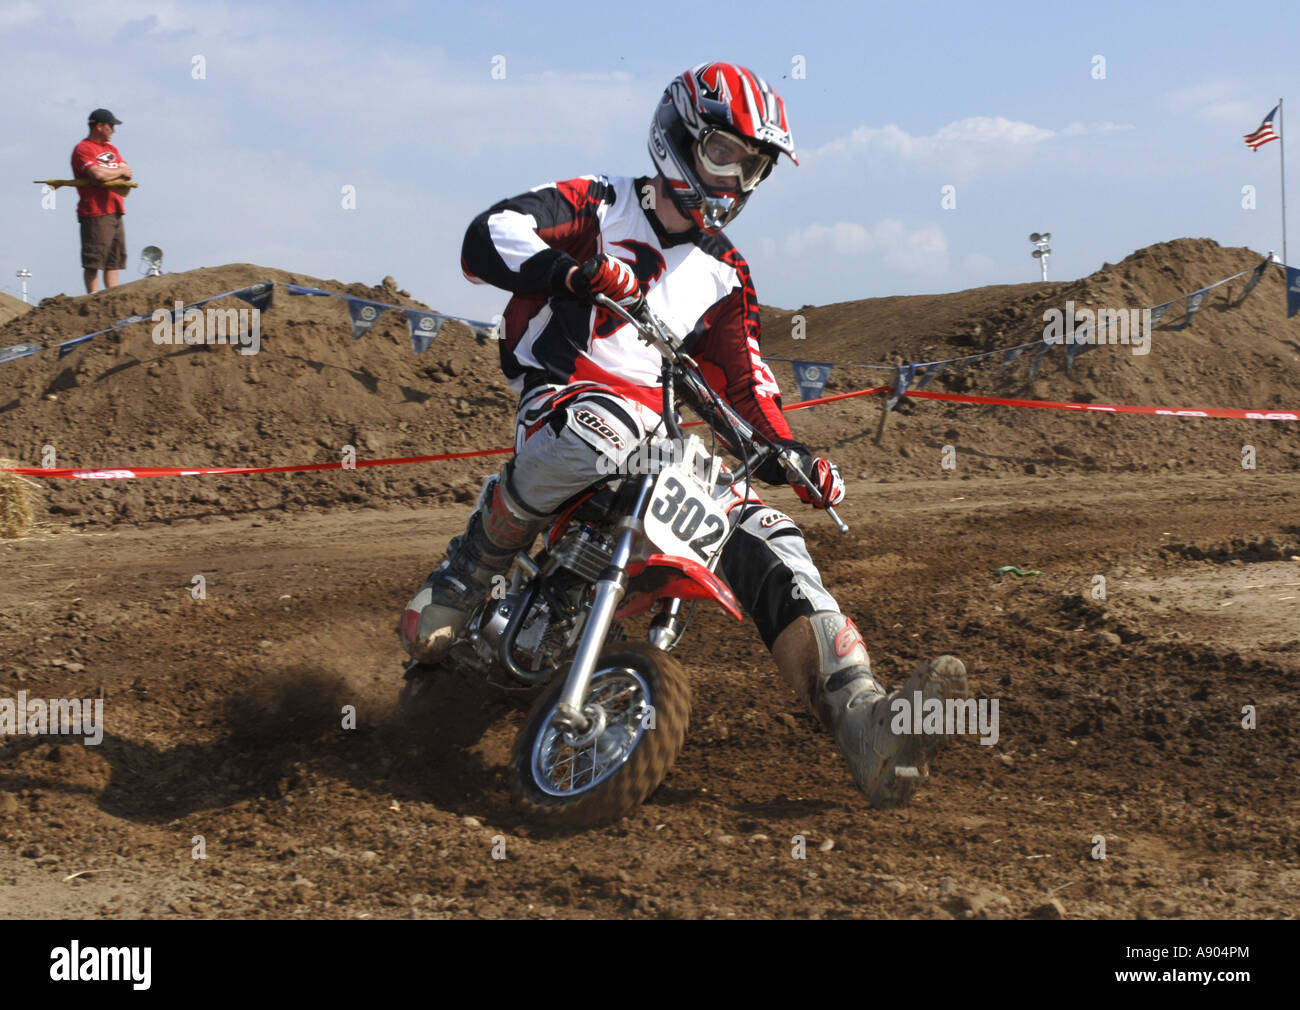 Motocross racing 15yr+ division race. Grown ups ride small 50cc motorcycles in this class. Stock Photo